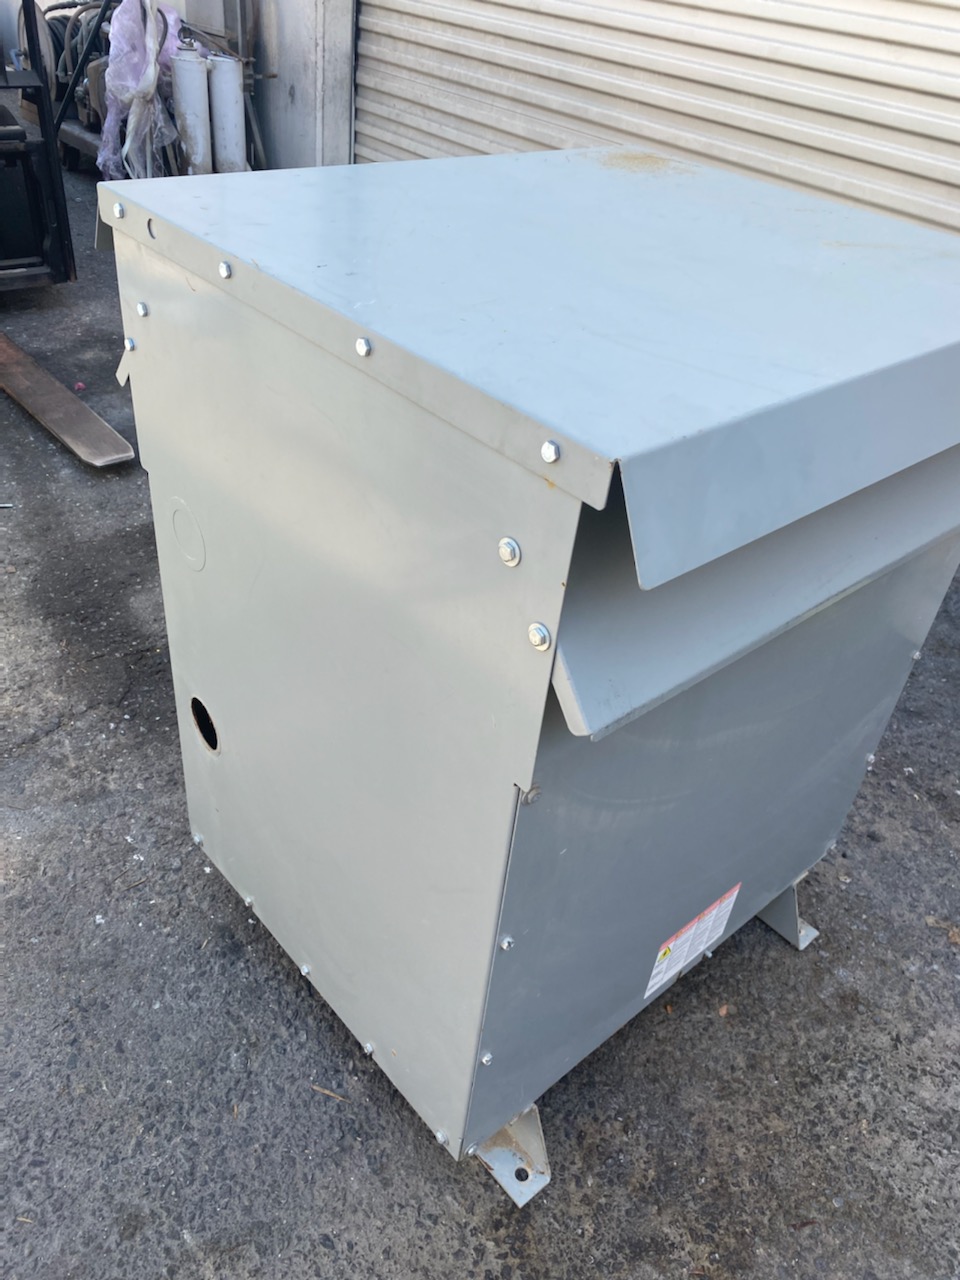 Sell Pad Mounted Transformers Near Los Angeles